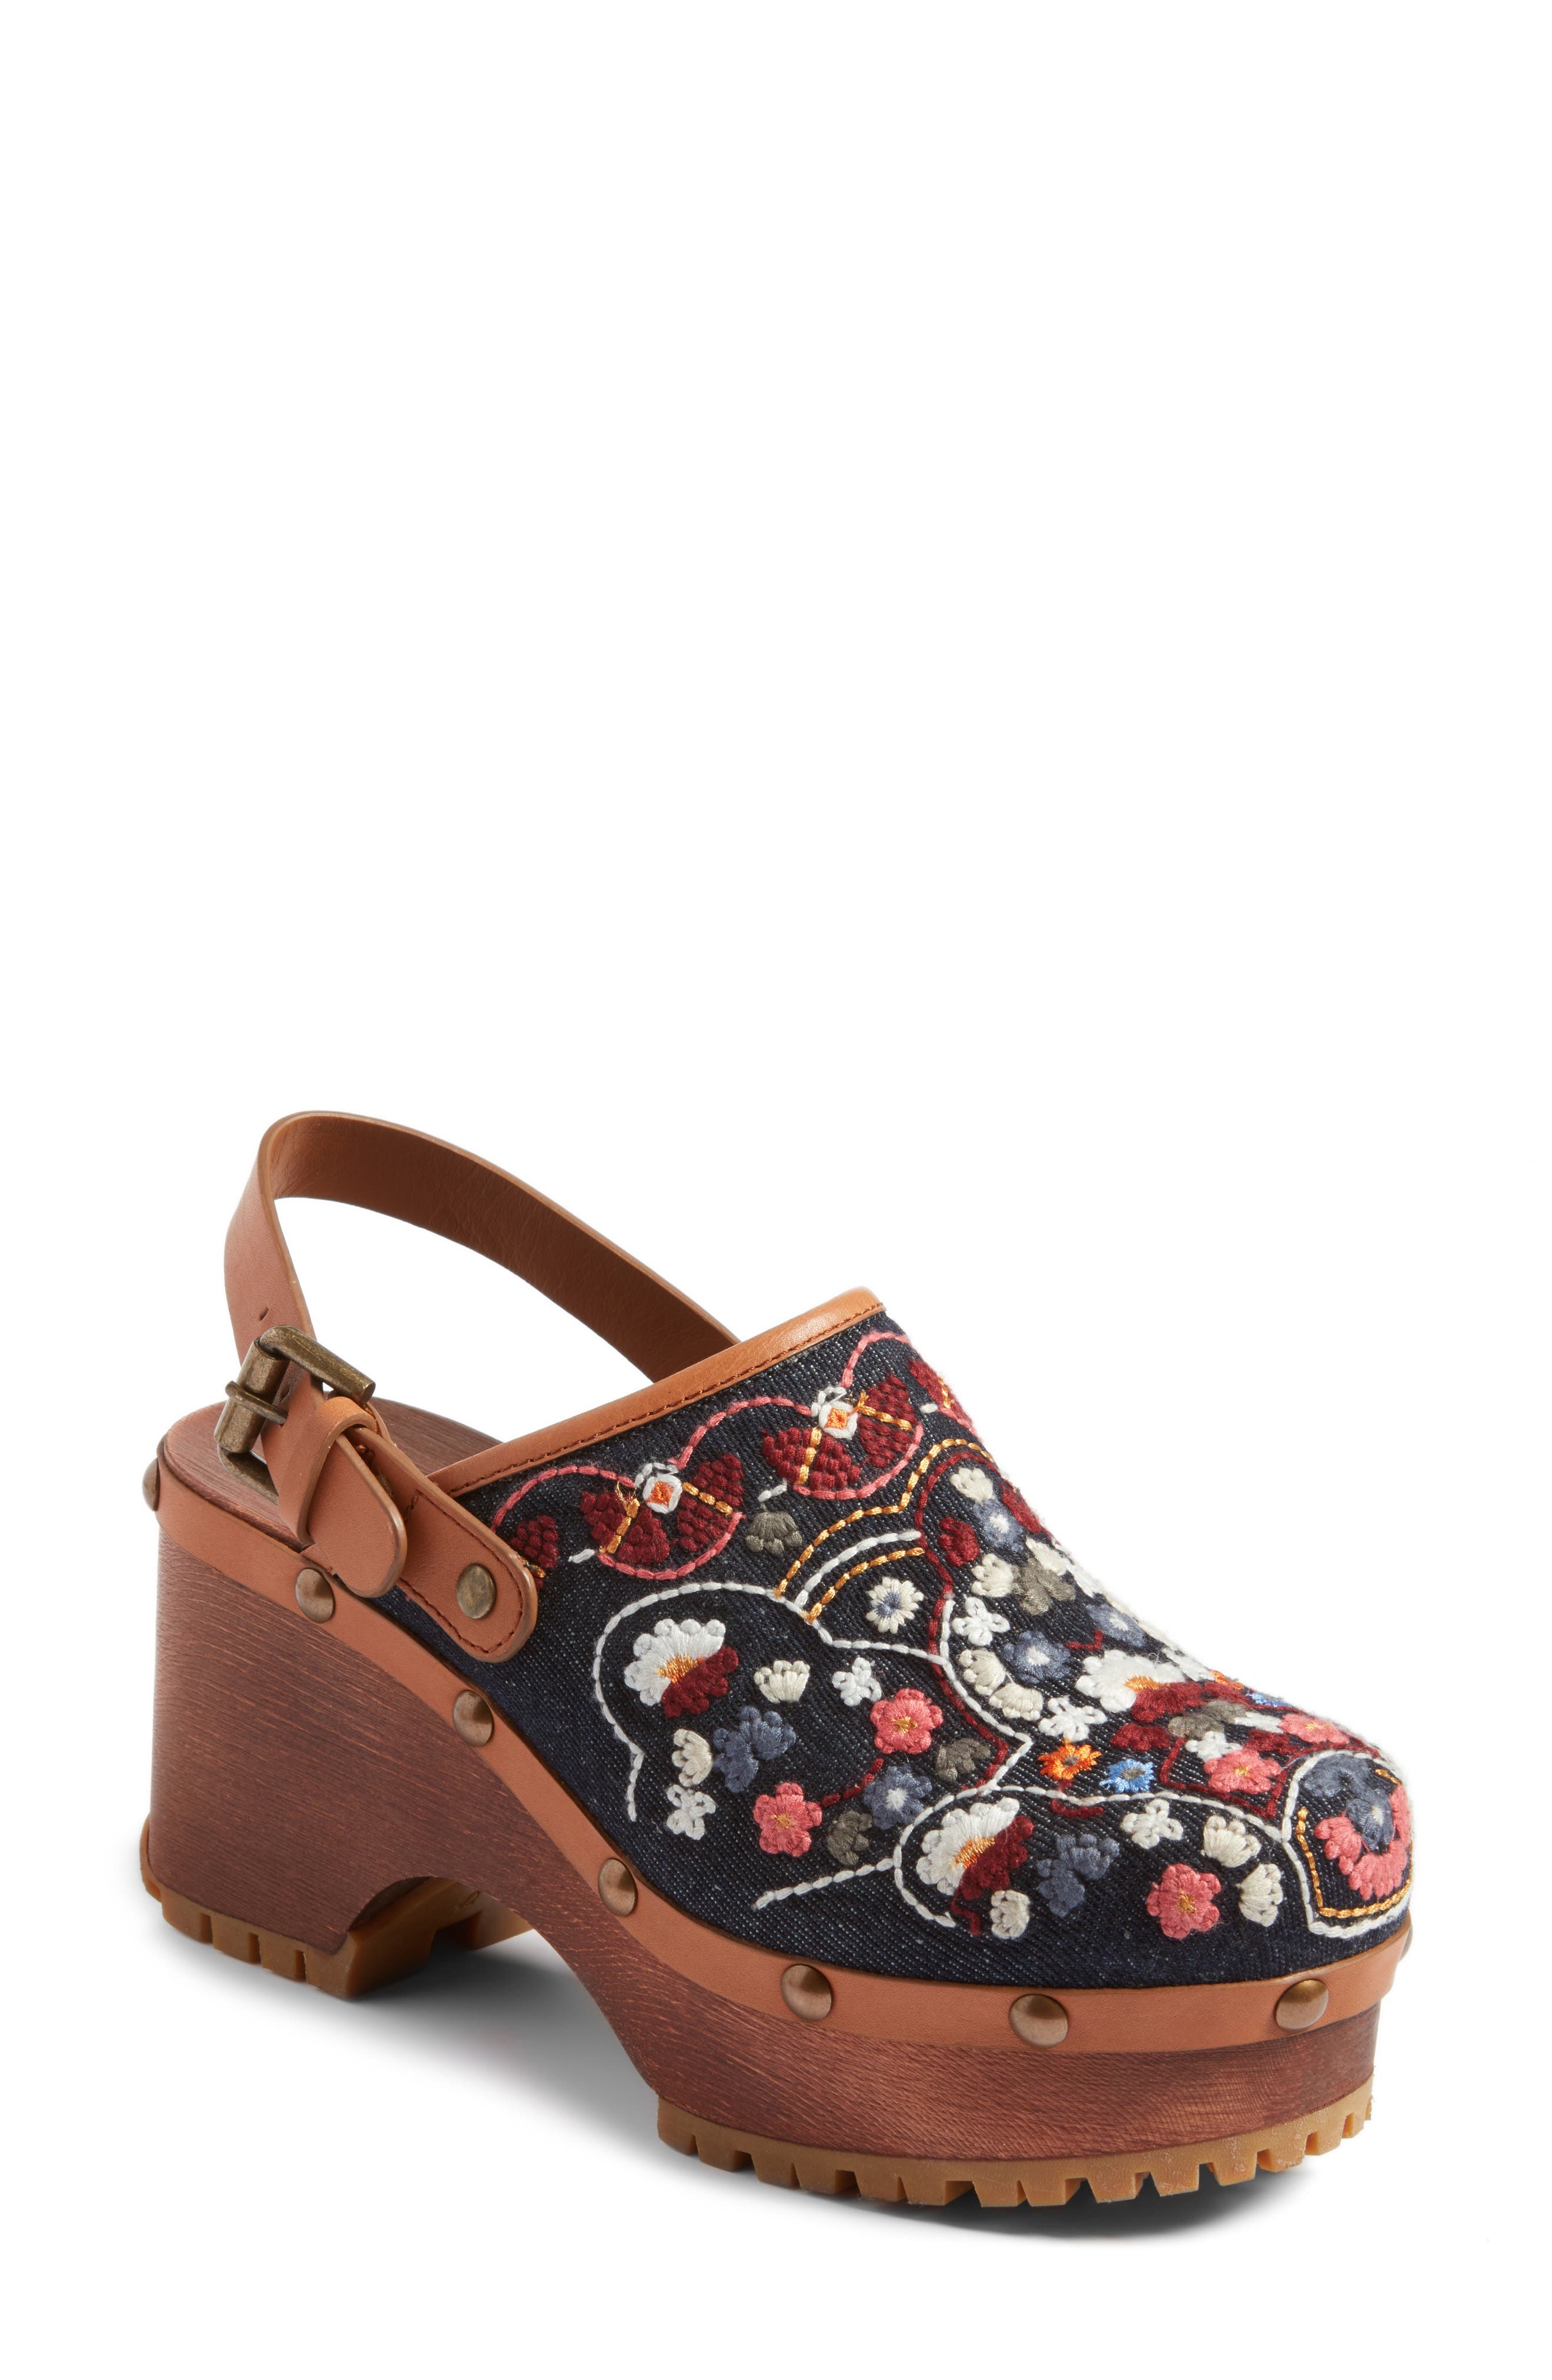 embroidered clogs